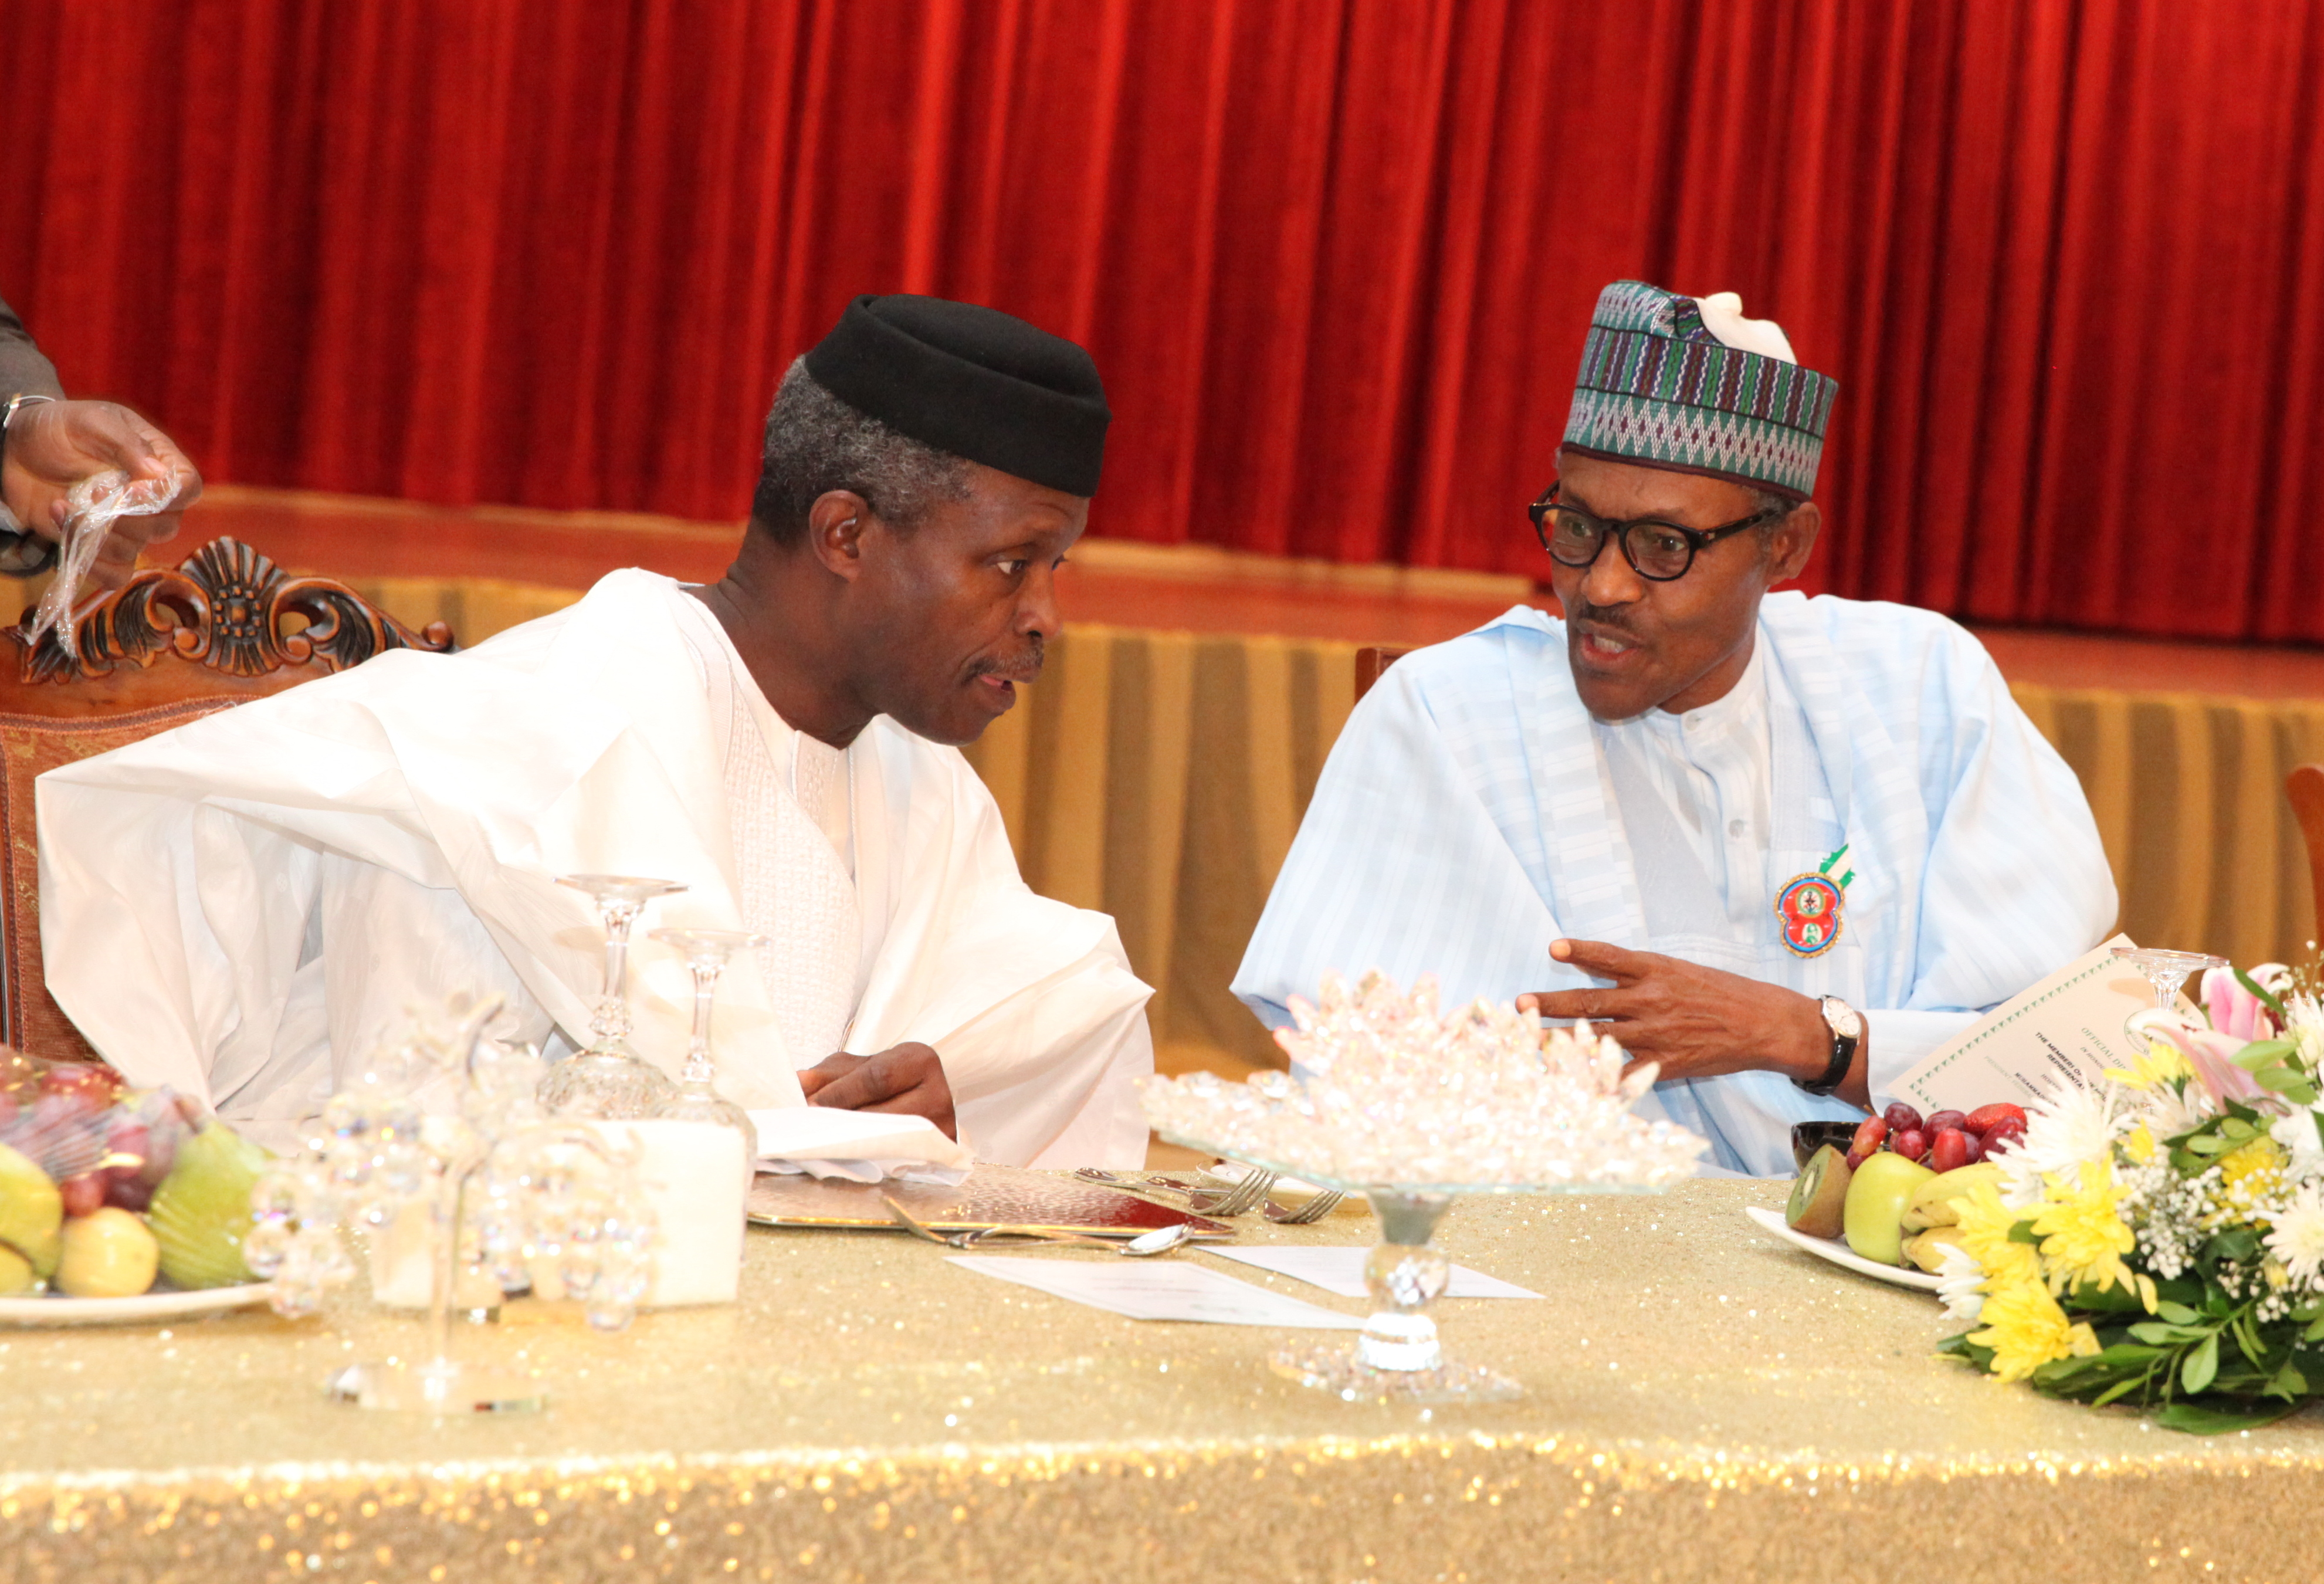 President Buhari & VP Osinbajo Attend Dinner With Members Of The House Of Representatives On 09/12/2015